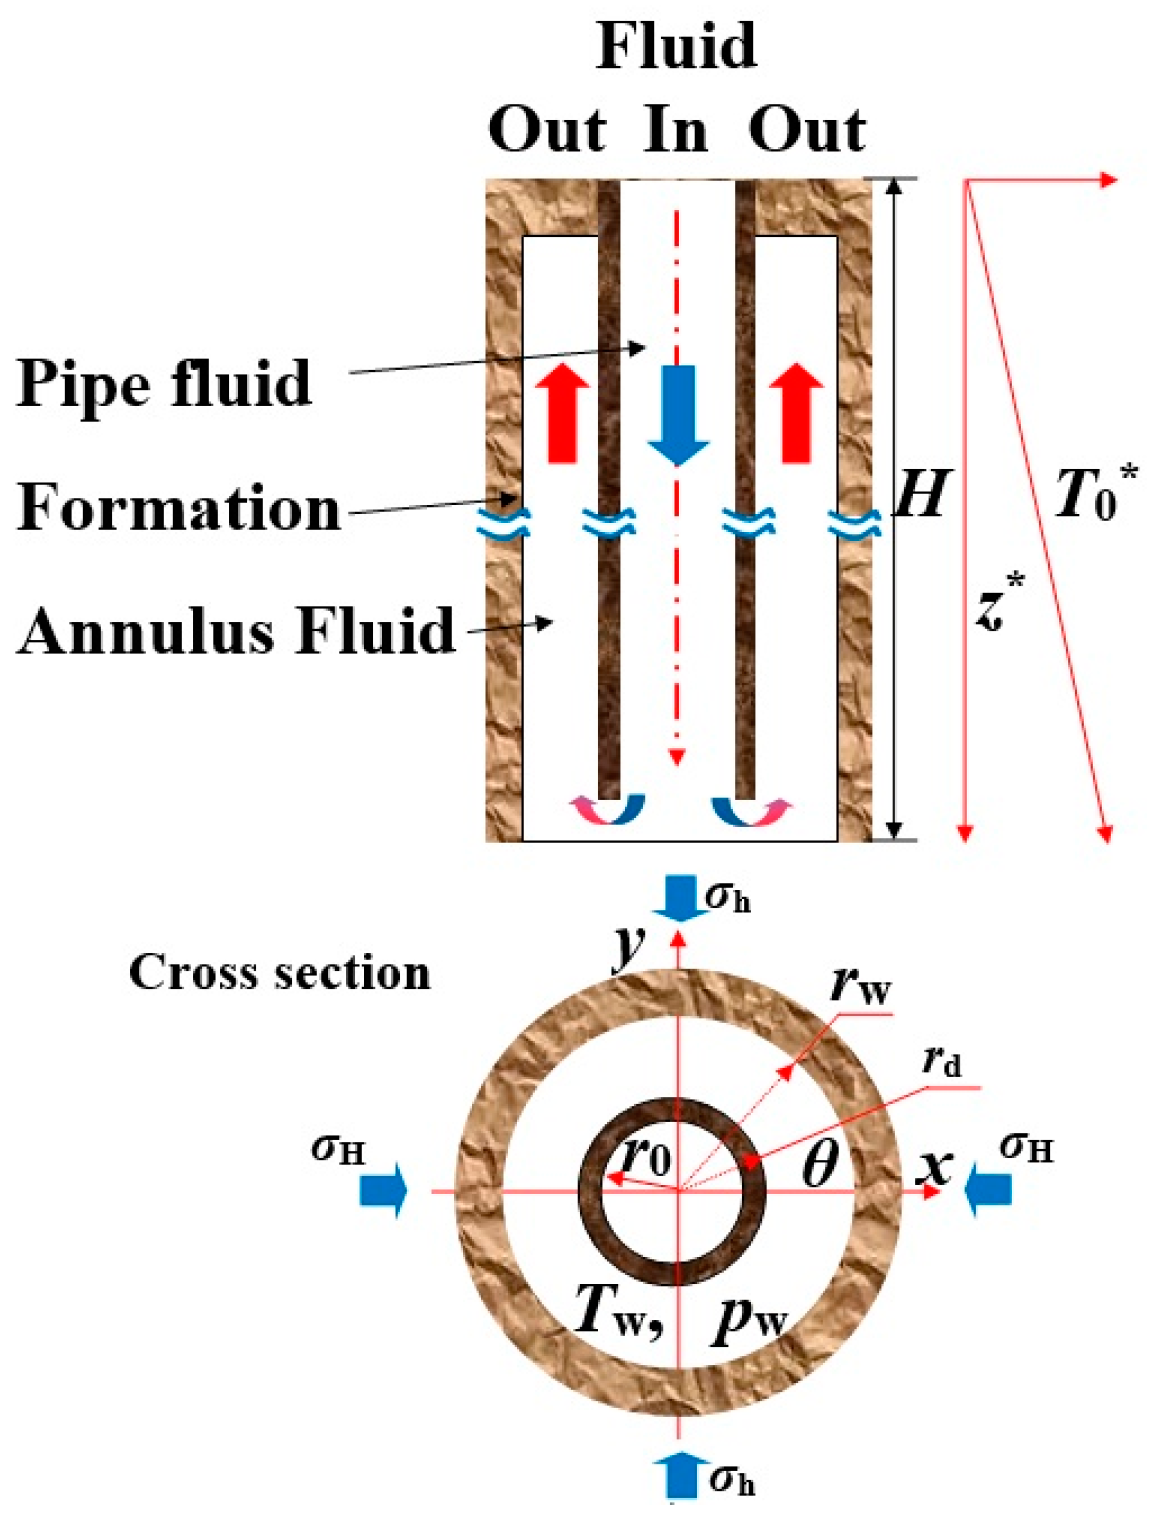 Fluid Flow And Heat Transfer In Wellbores Pdf Merge